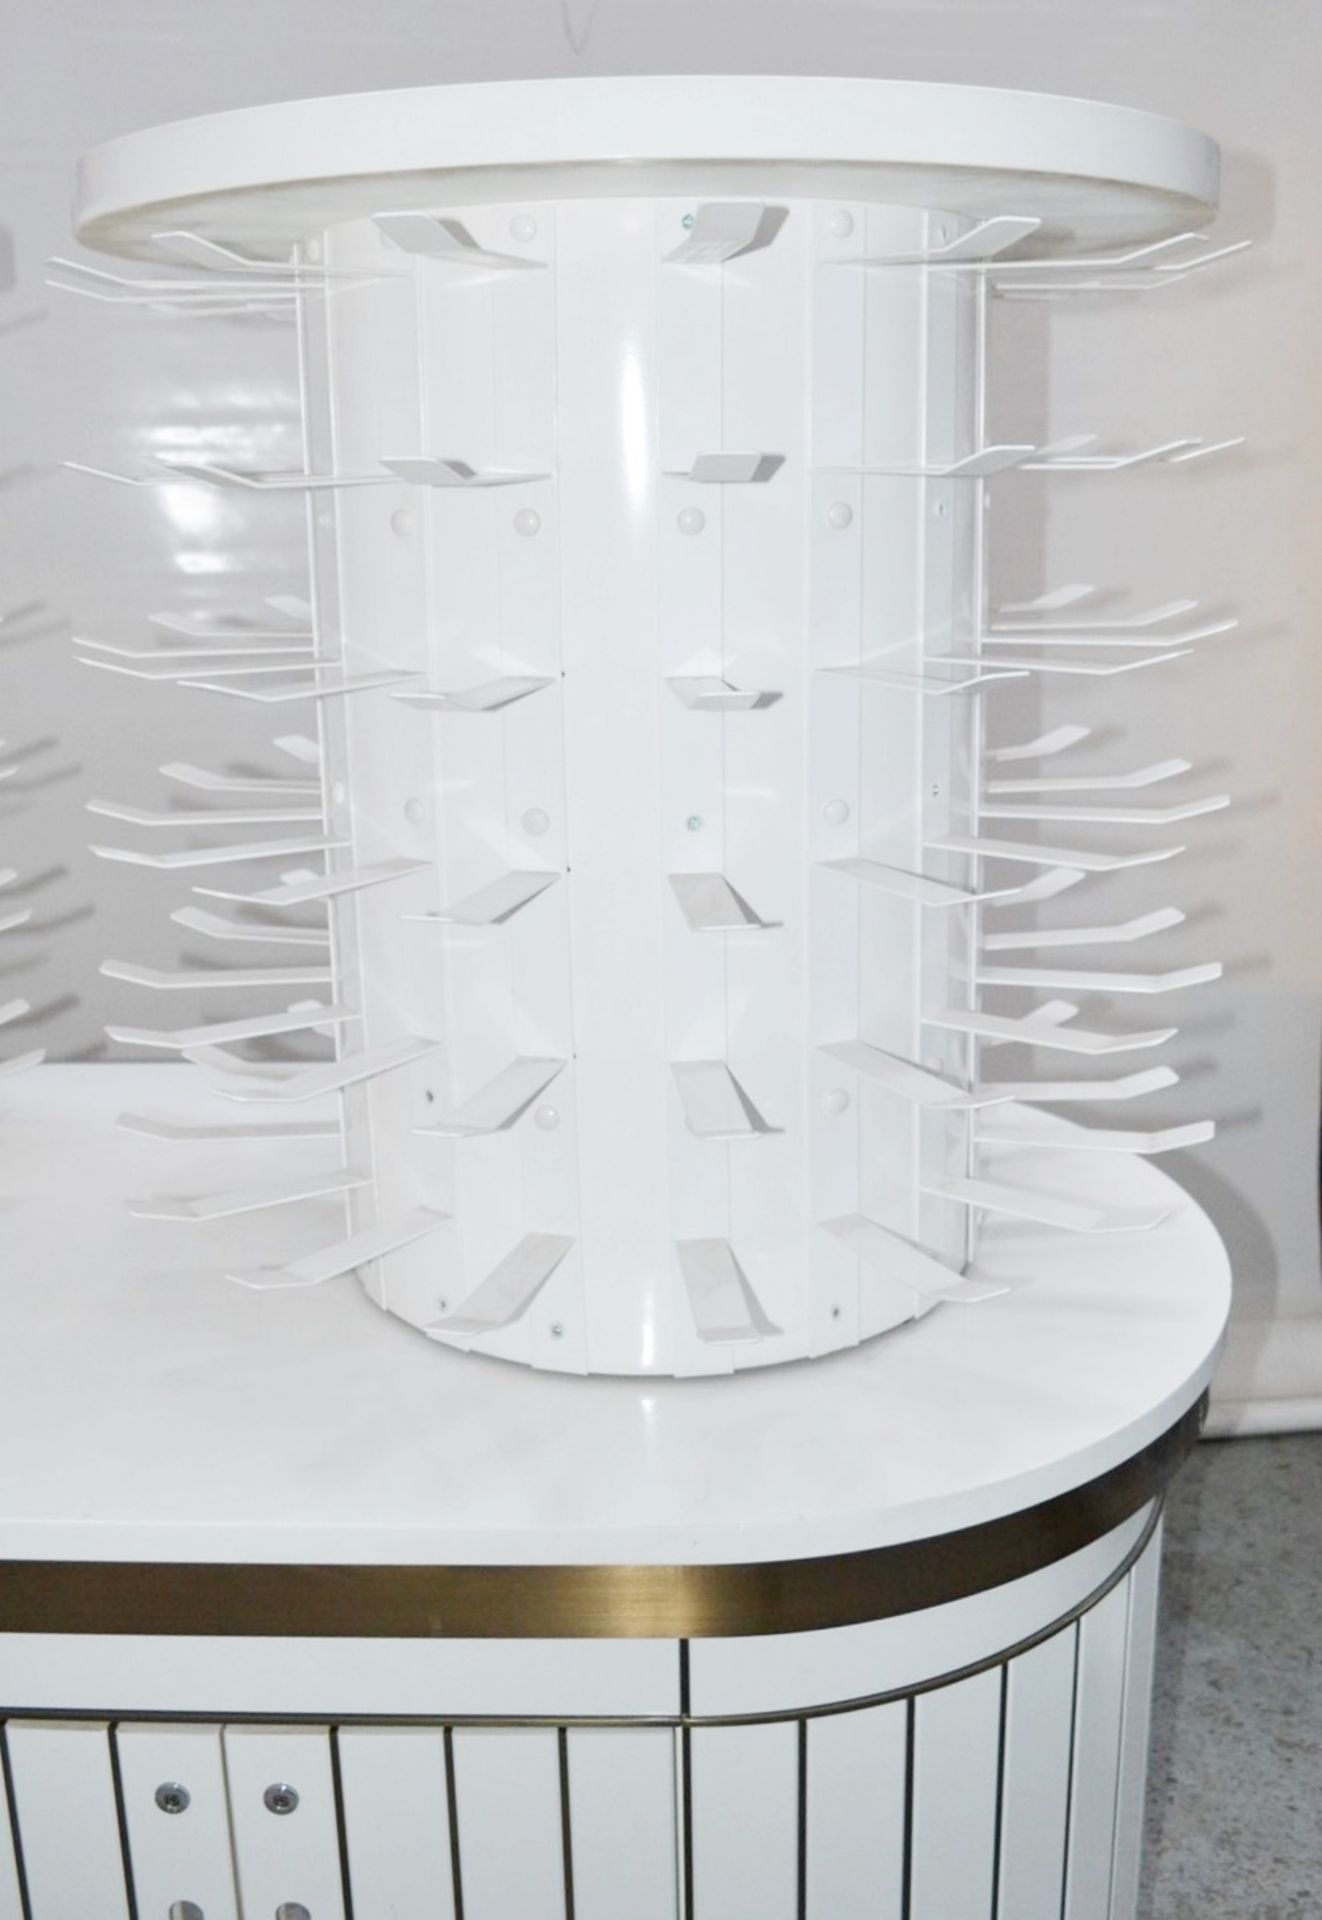 1 x Curved Cosmetics Shop Counter With Revolving Carousels In White - Colour: White - Dimensions: - Image 4 of 8